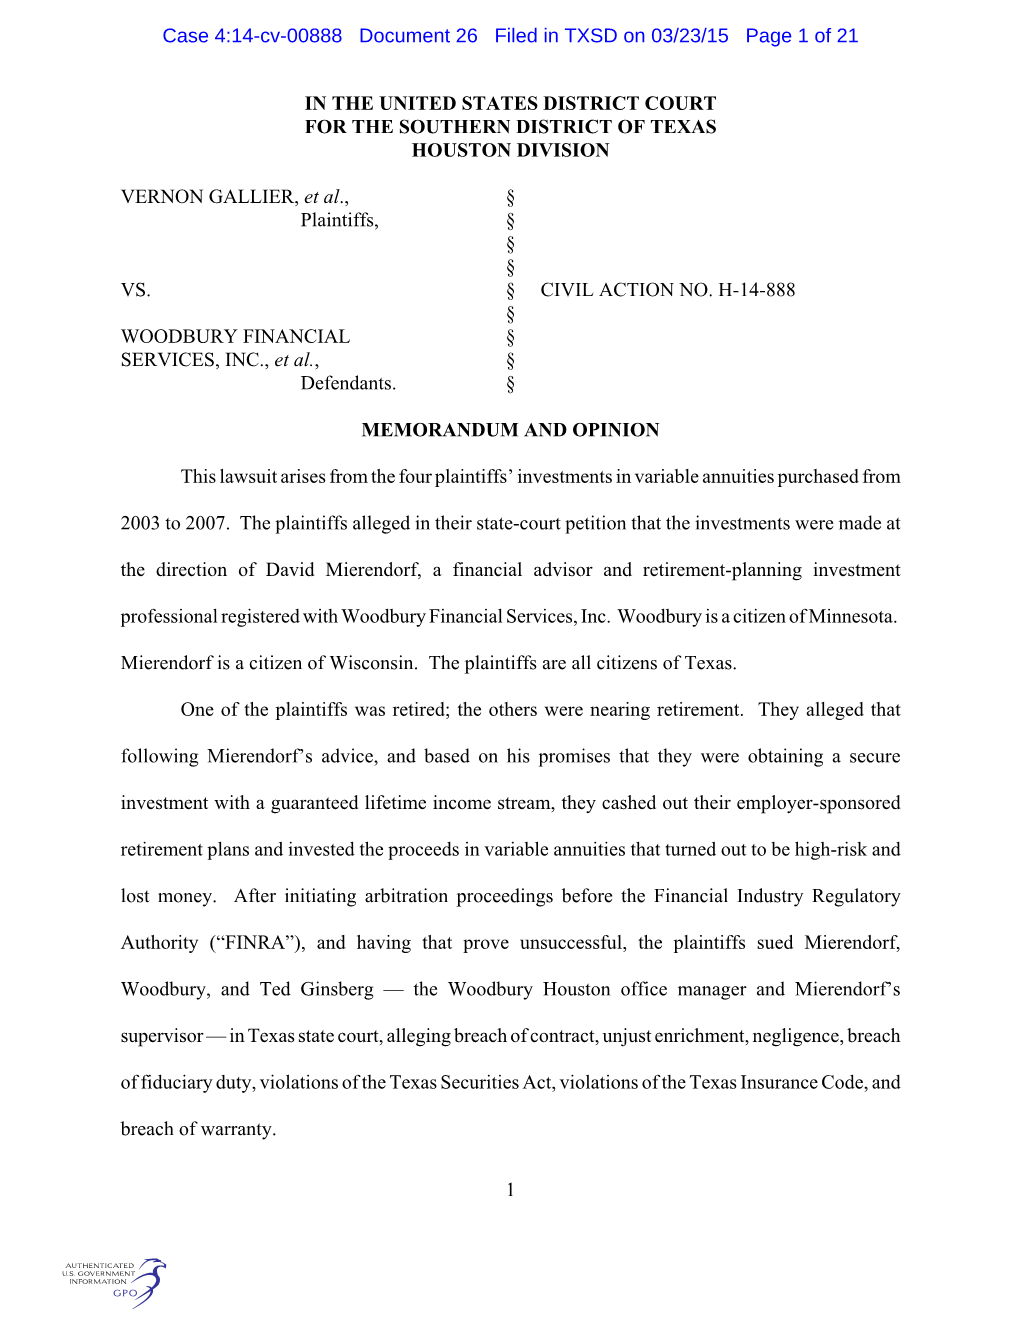 Case 4:14-Cv-00888 Document 26 Filed in TXSD on 03/23/15 Page 1 of 21